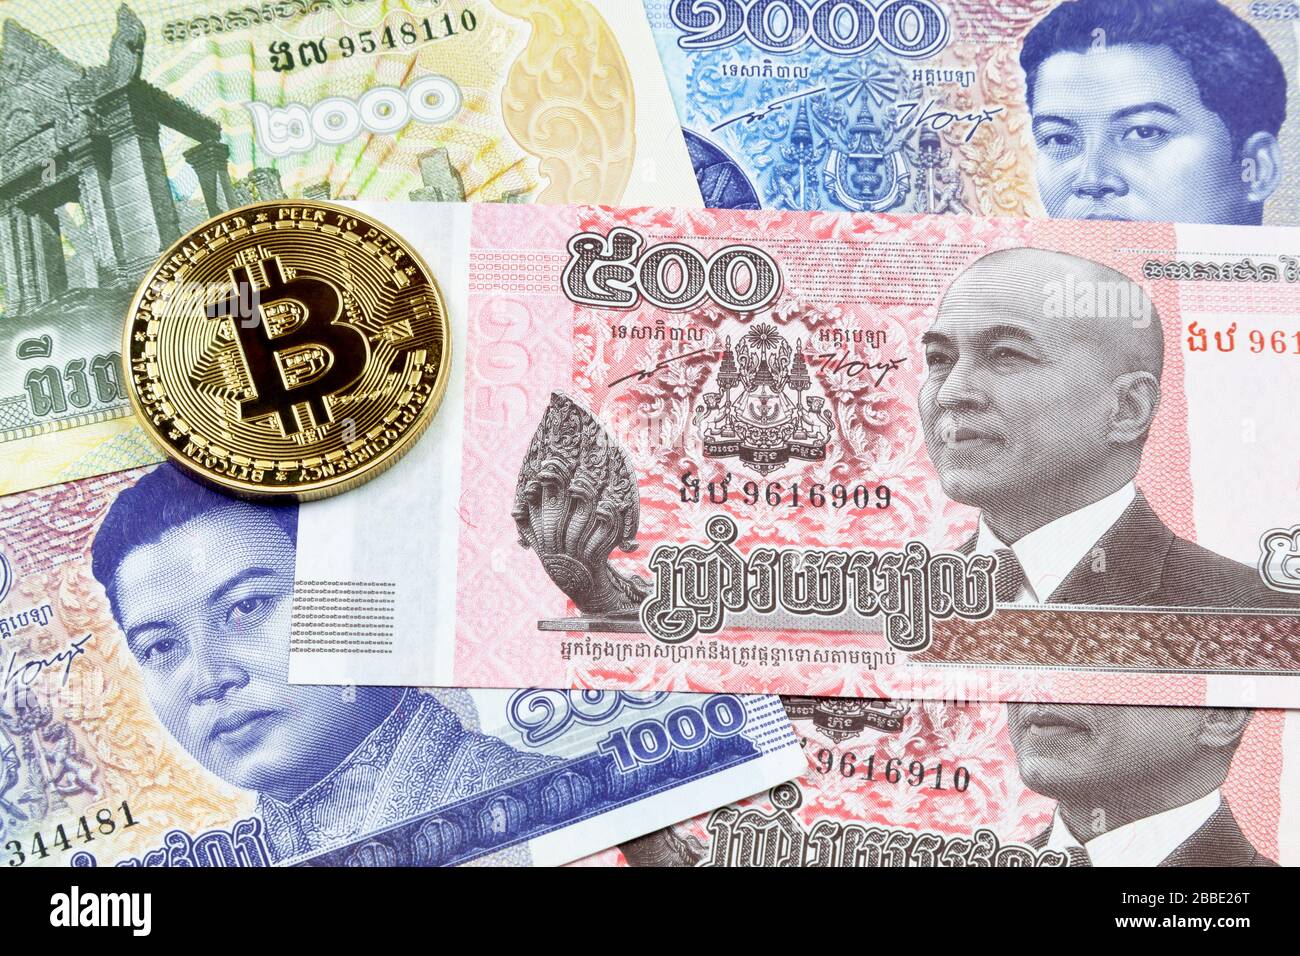 Close-up on a golden Bitcoin coin on top of a stack of Cambodian riel banknotes. Stock Photo